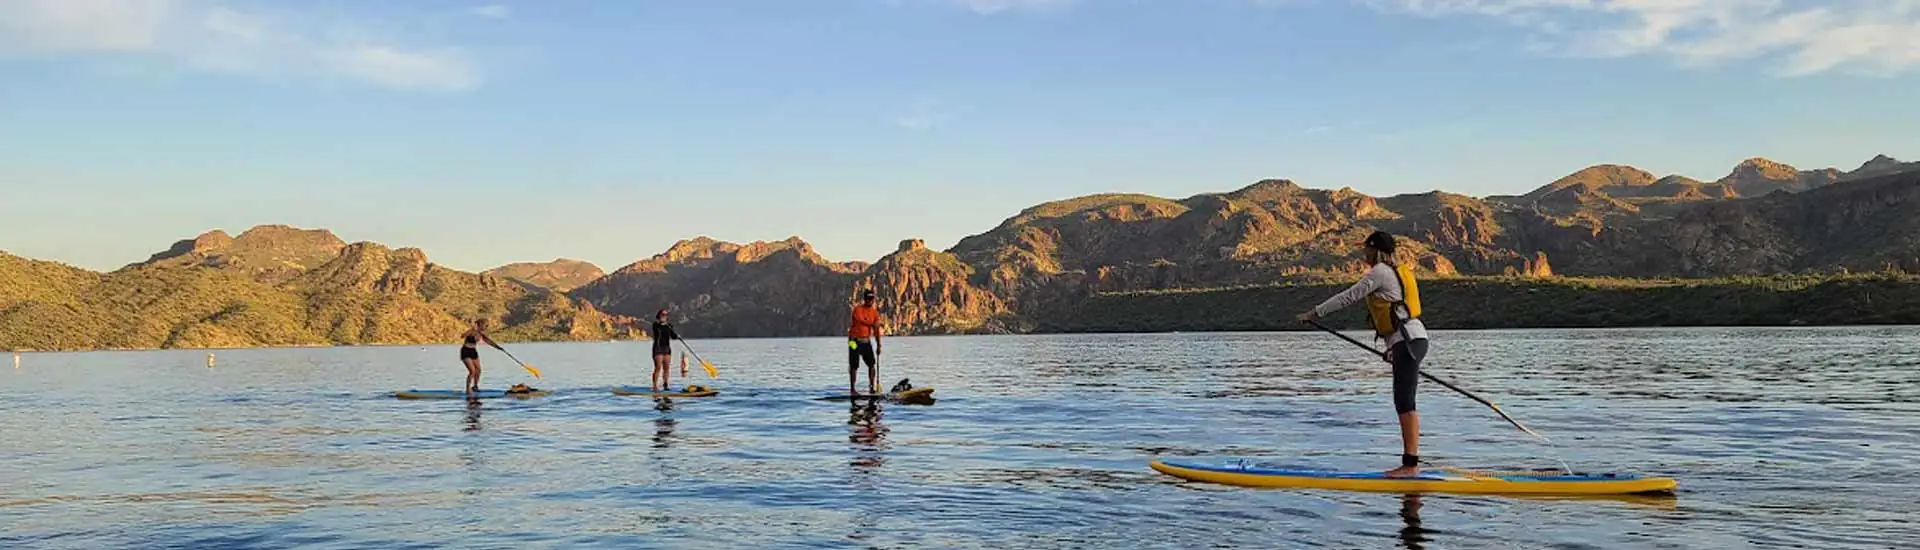 People at paddle boarding lessons on Saguaro Lake at sunset. Riverbound Paddle Company Lessons